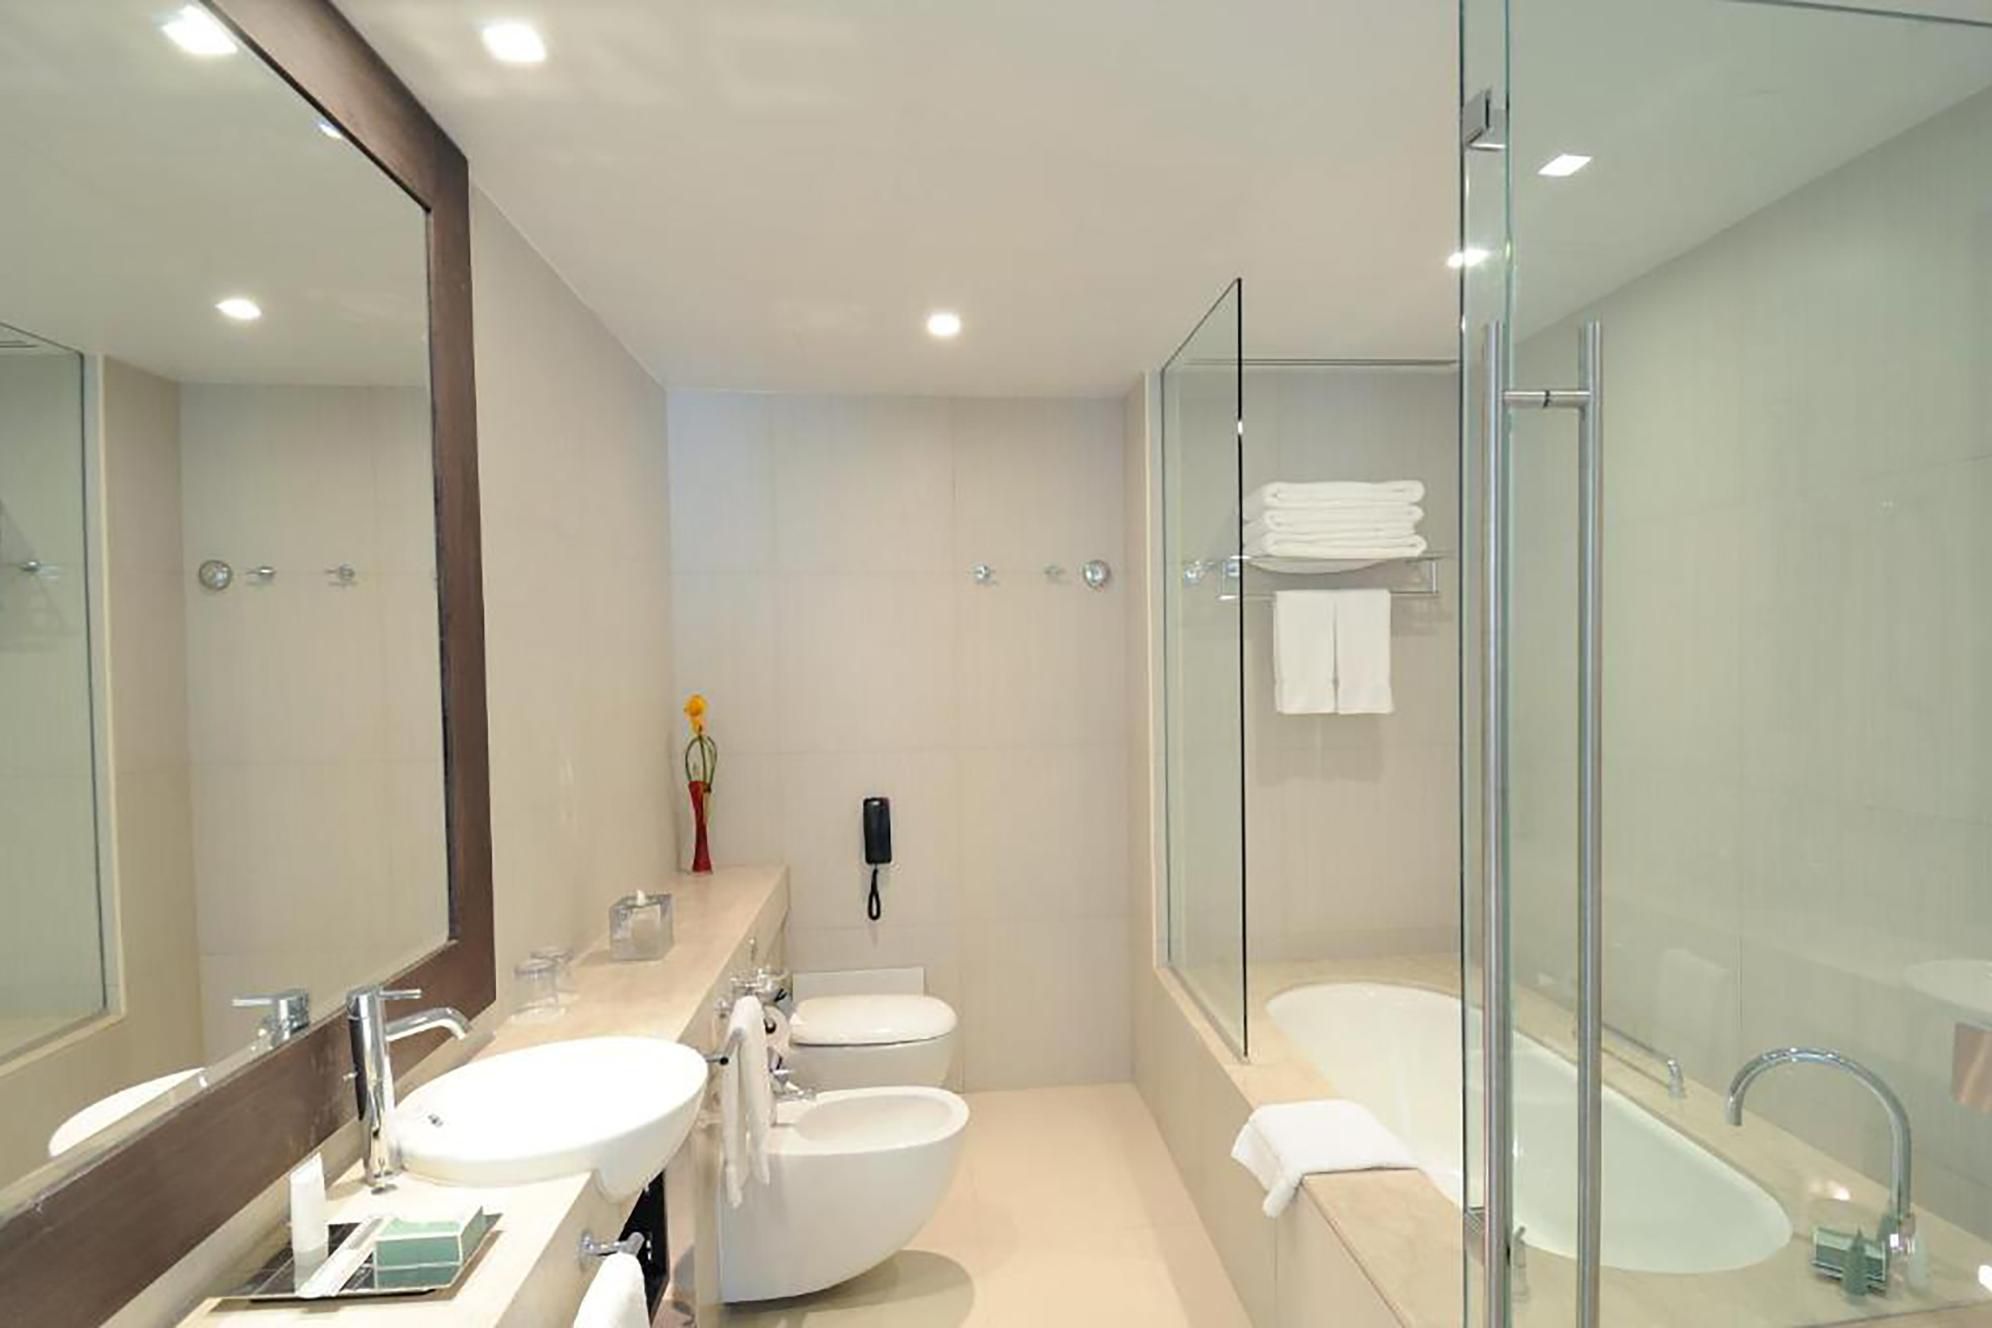 Clean and complete bathroom amenities for your comfort